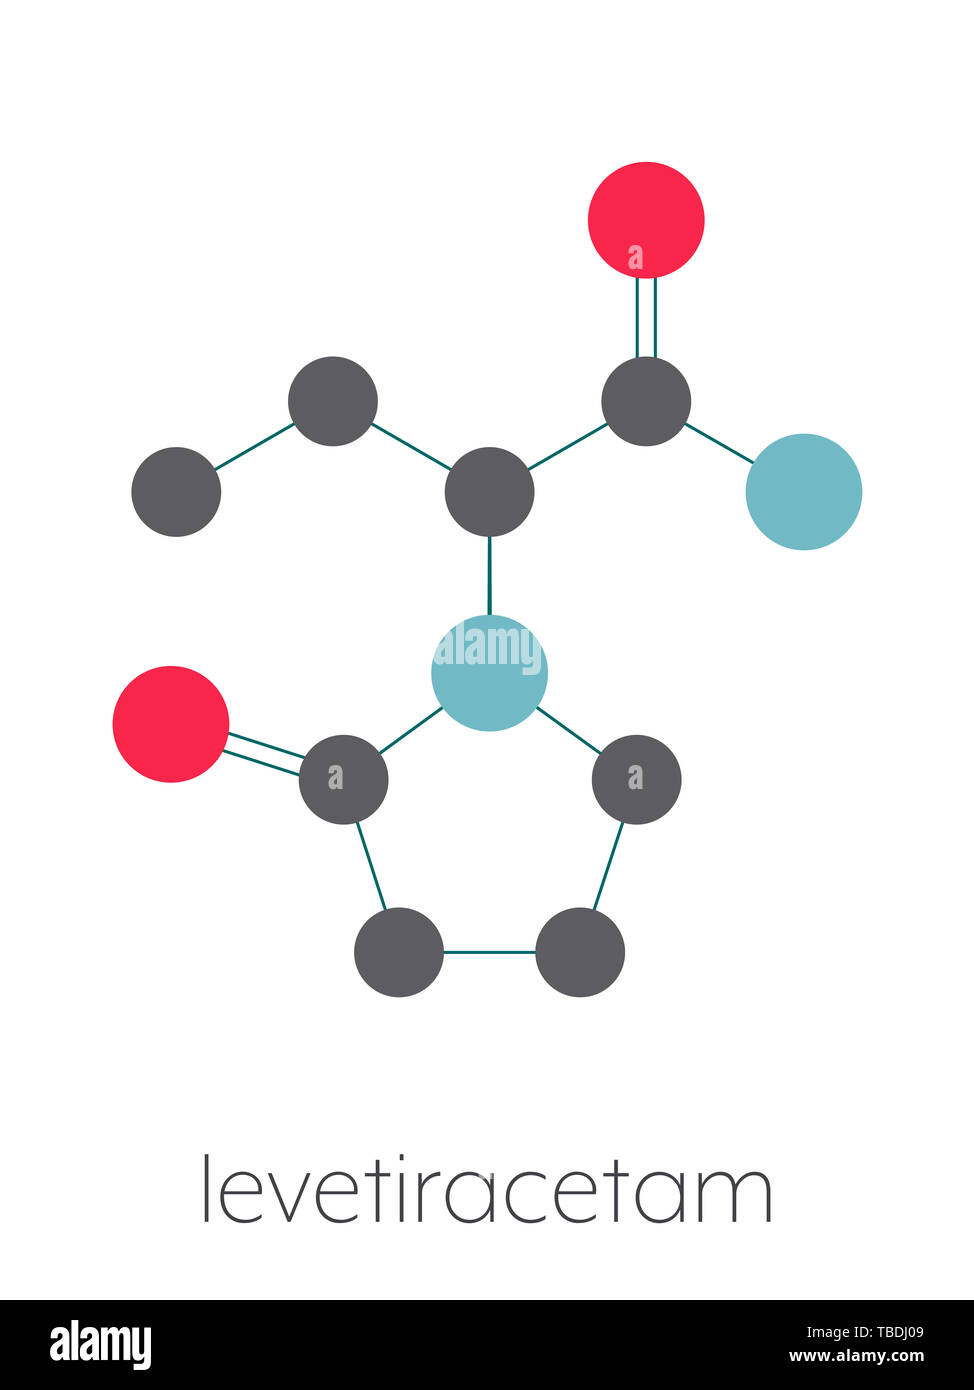 Levetiracetam epilepsy (seizures) drug molecule. S-isomer of etiracetam. Stylized skeletal formula (chemical structure). Atoms are shown as color-coded circles connected by thin bonds, on a white background: hydrogen (hidden), carbon (grey), oxygen (red), nitrogen (blue). Stock Photo